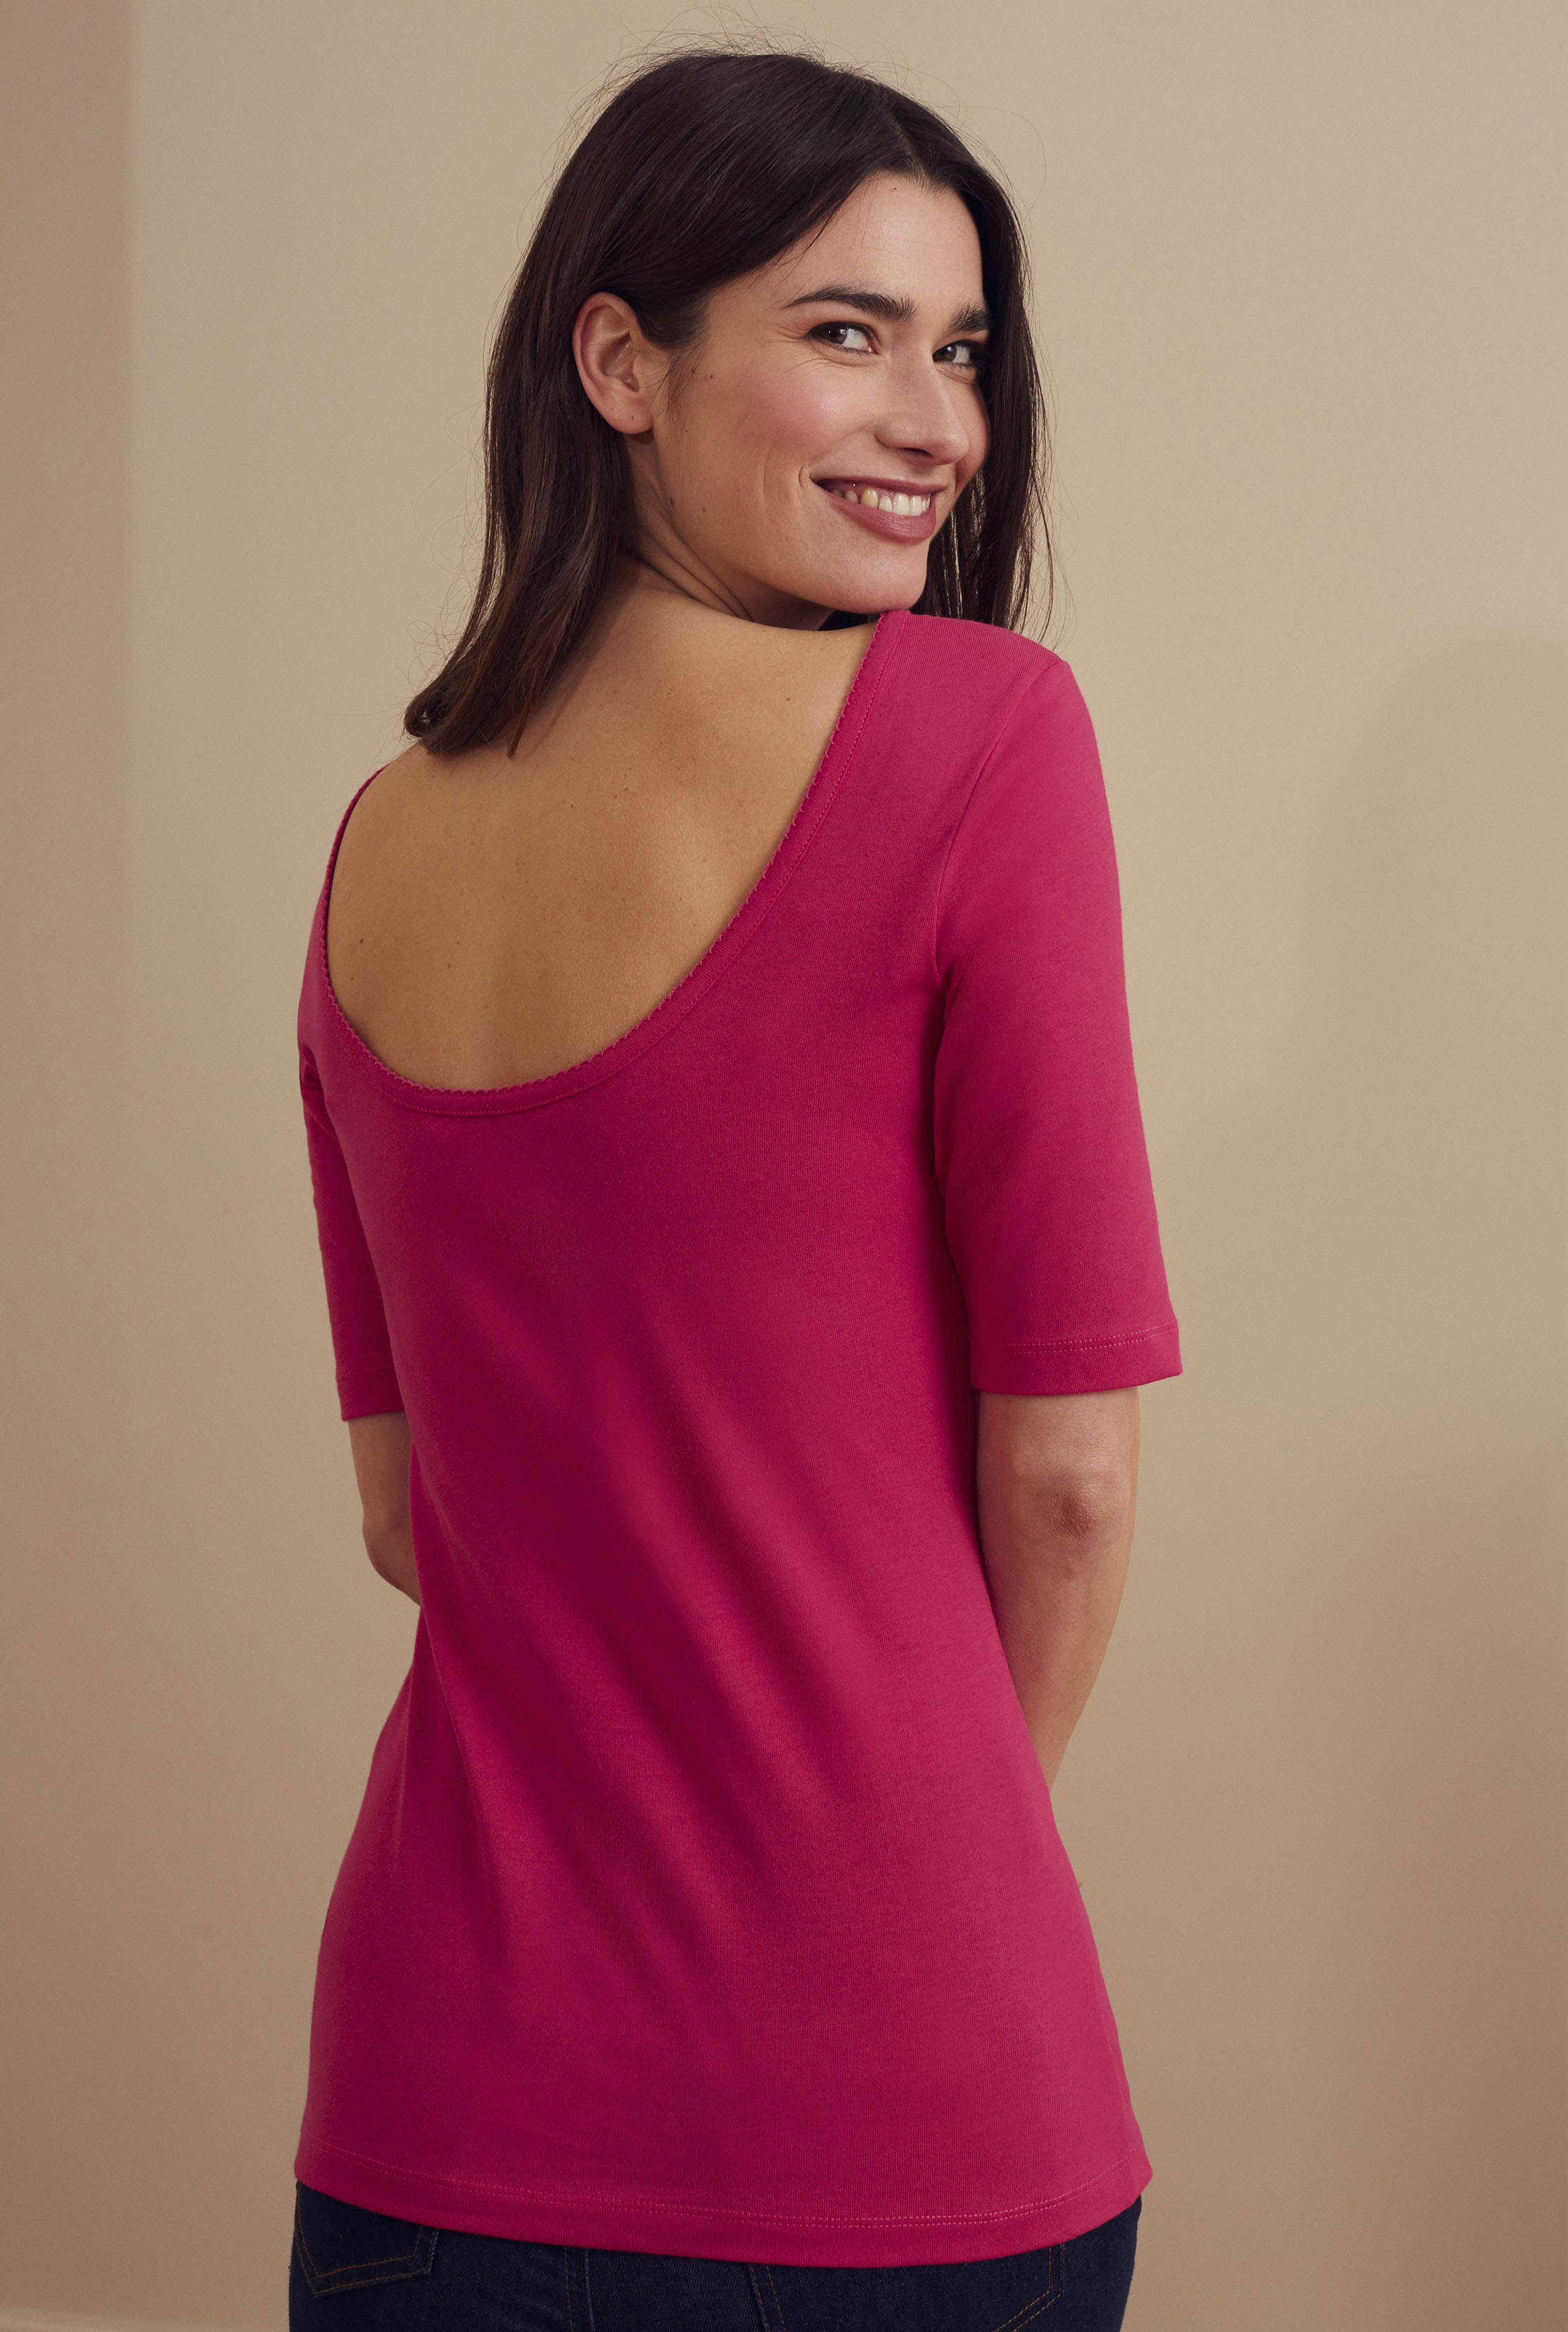 The Elbow Sleeve Cotton Scoop Back Tee